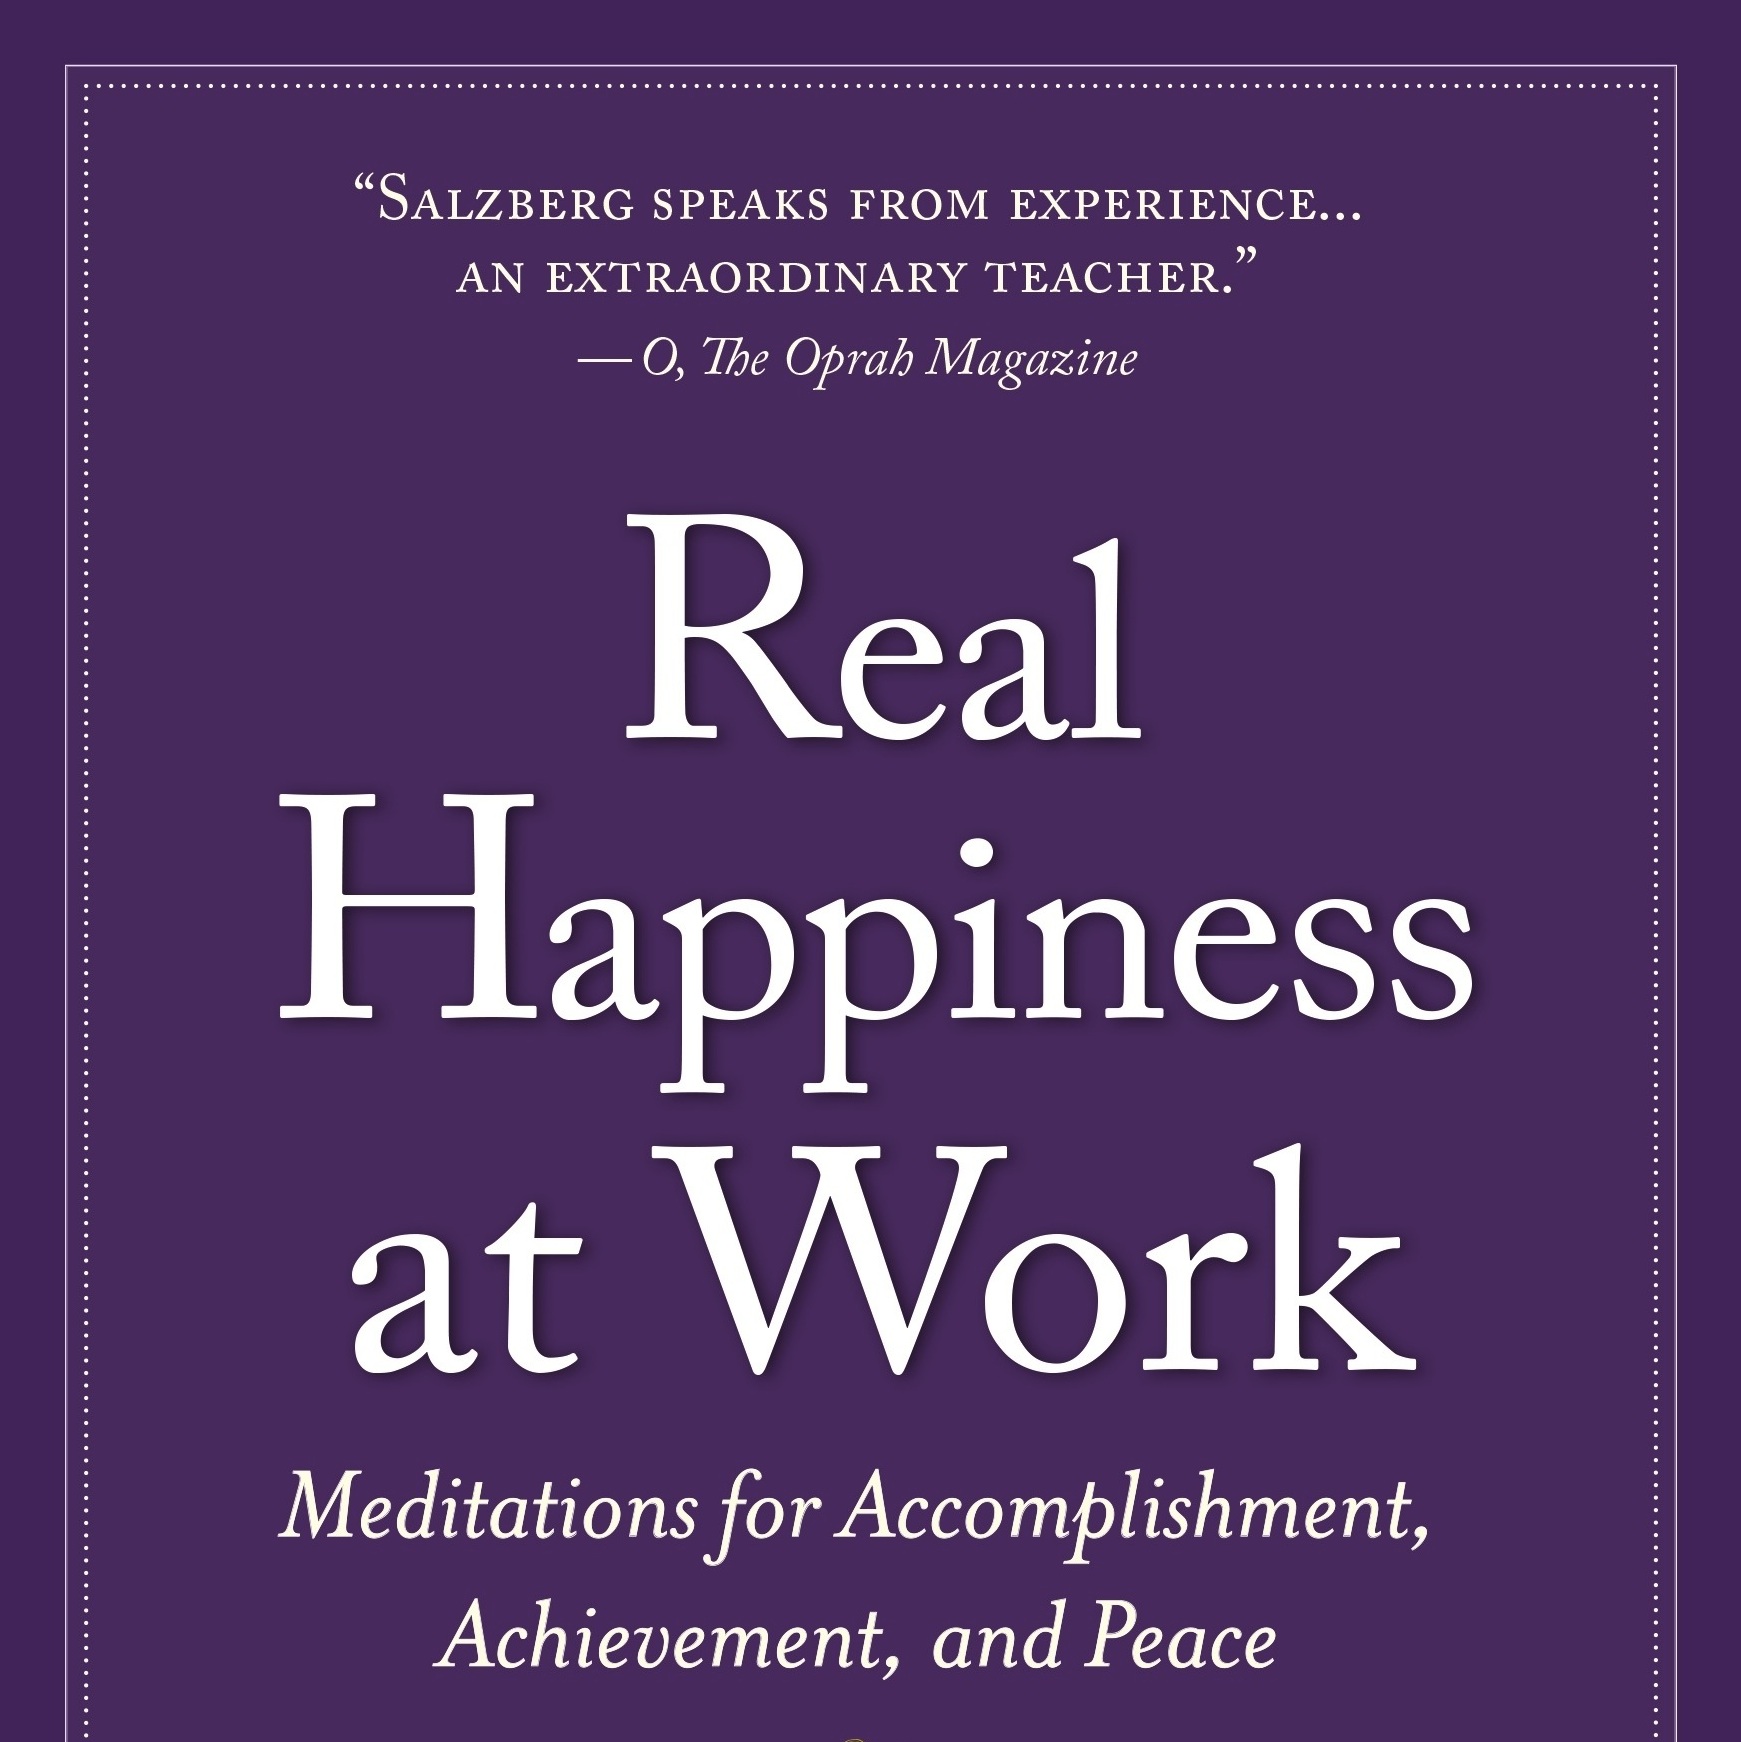 The Bookworm: Is There Room at Work for Happiness?